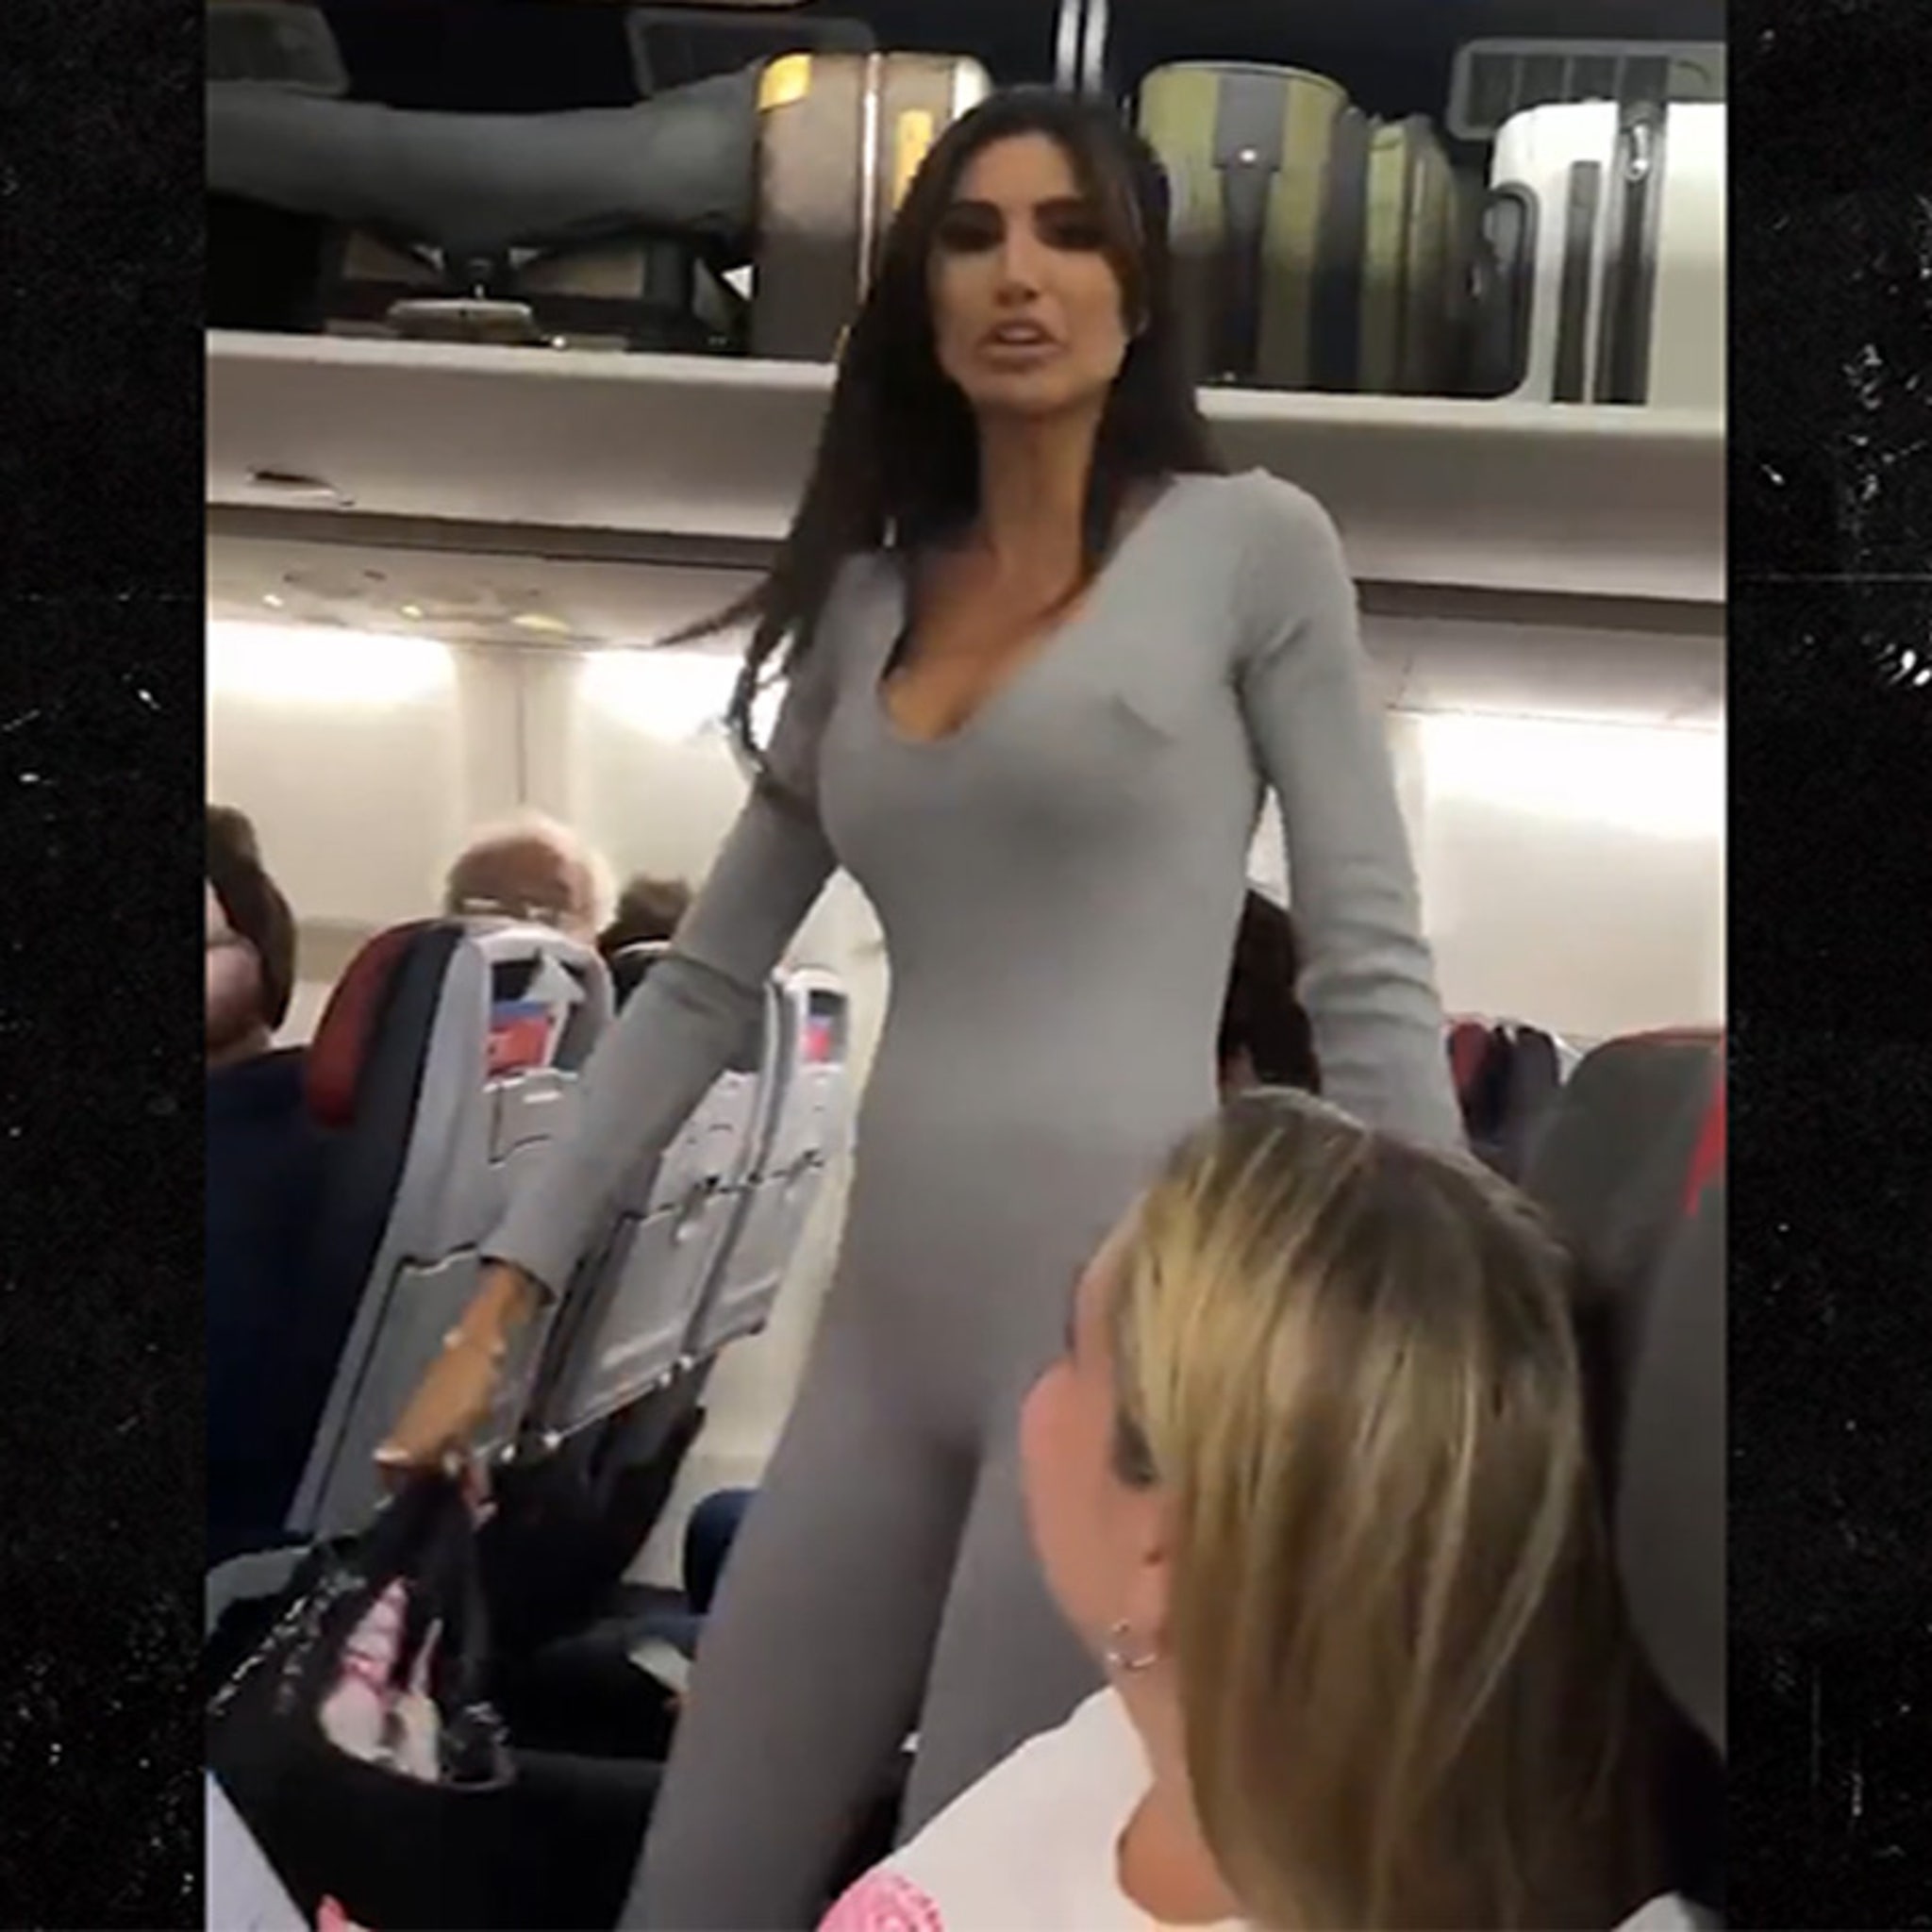 Sexy Woman in Bodysuit Kicked Off Plane, Claims Shes IG Famous